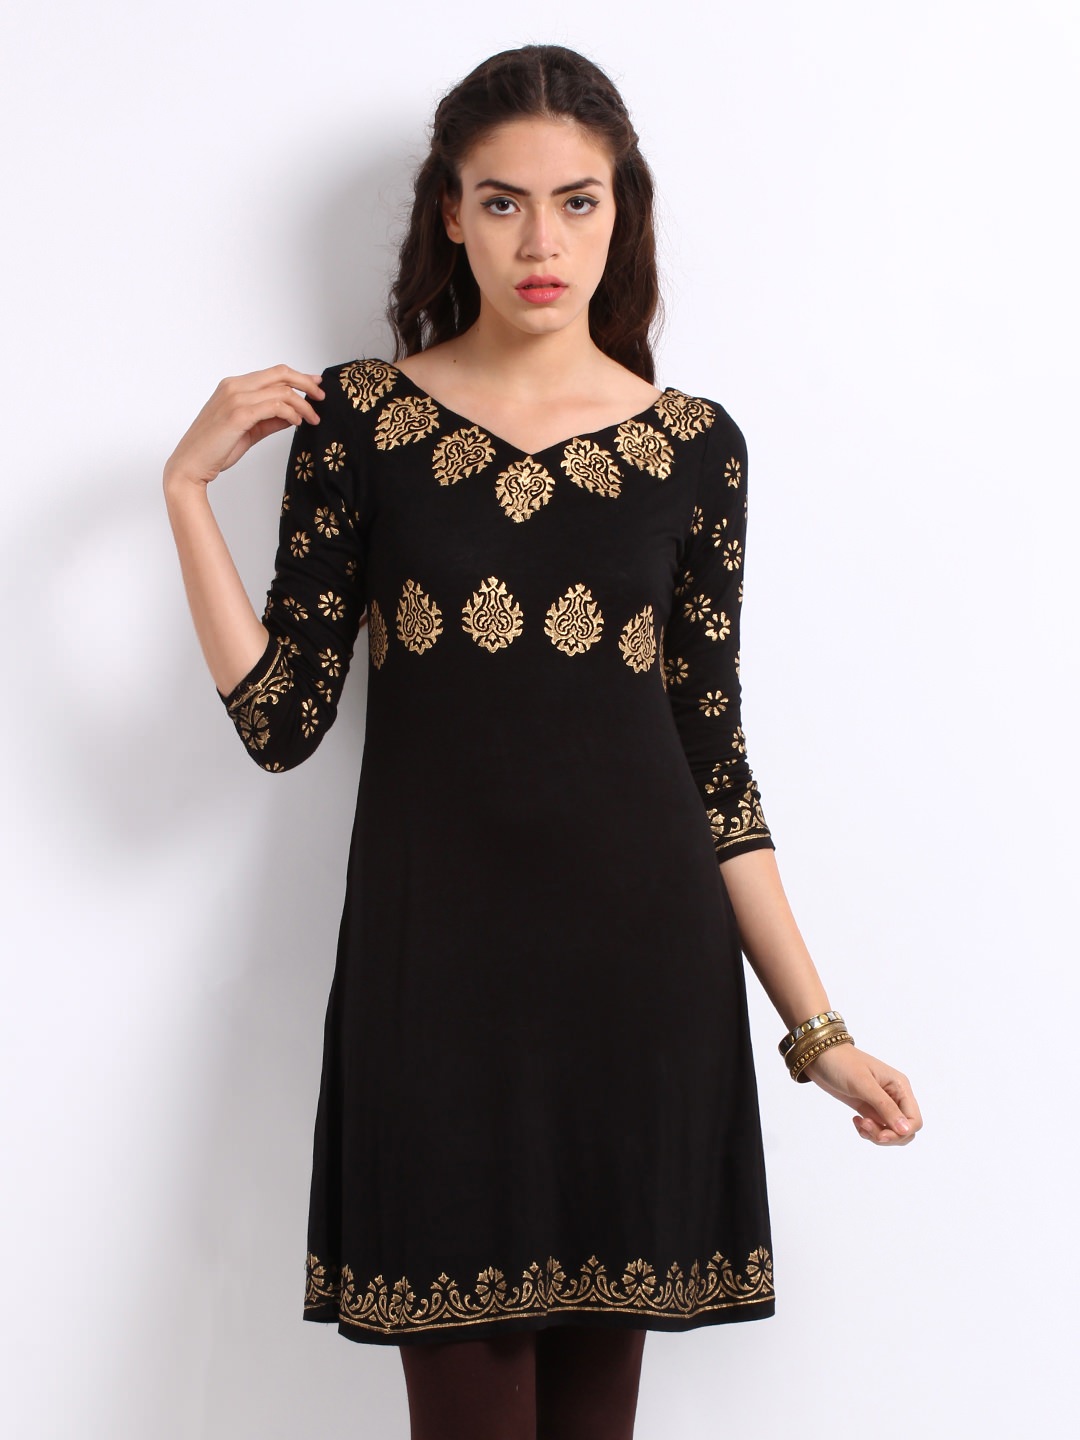 Women Black & Gold Printed Kurta (Perfect Gift For Women) Super Fast Delivery : Your Daughter, GF and Wife will have big Smile and Happiness